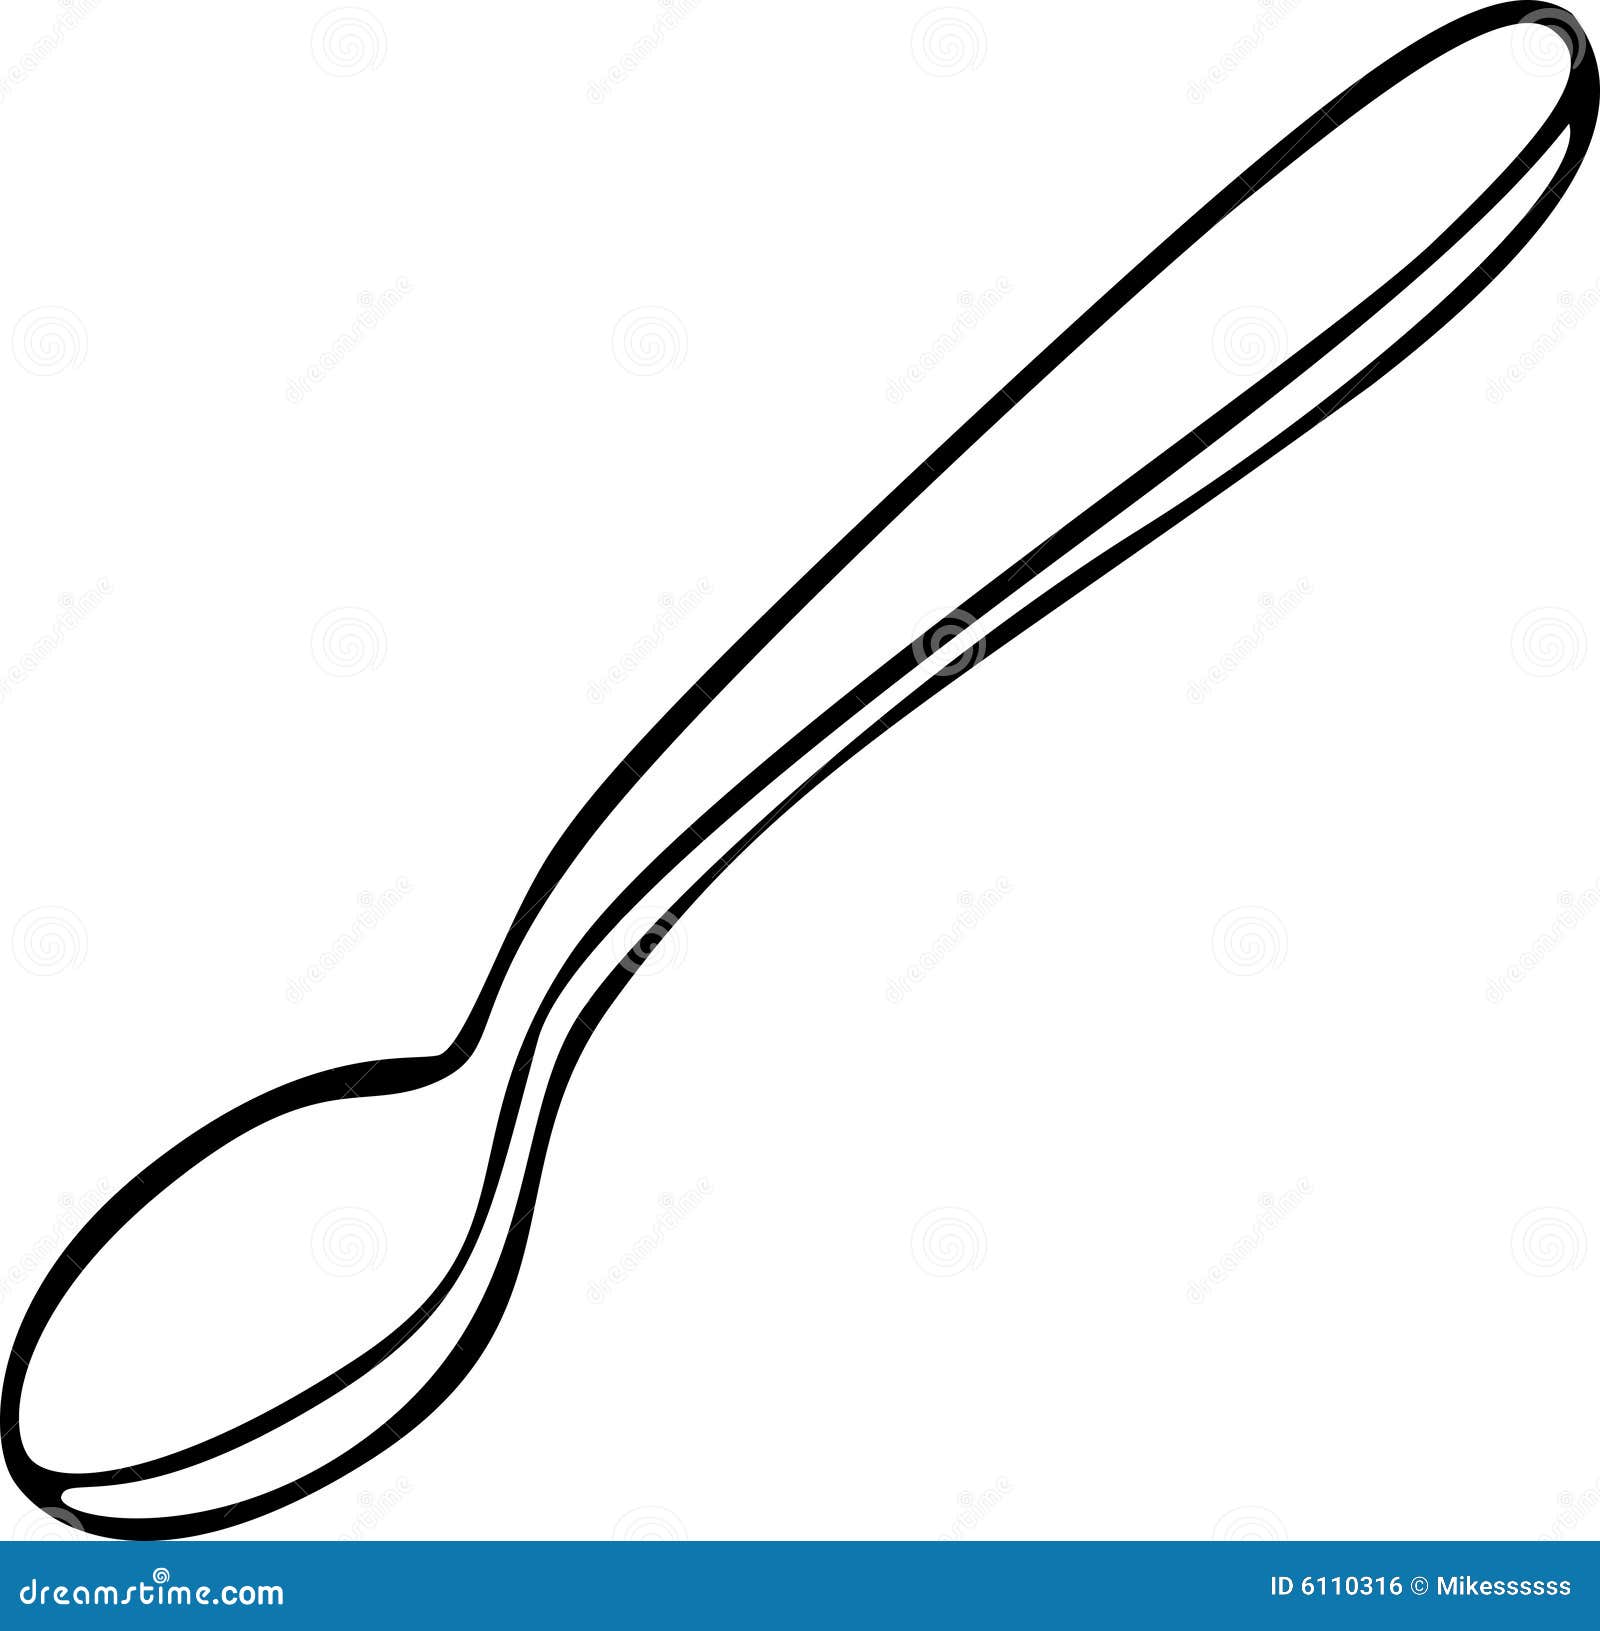 Spoon Vector Illustration Royalty Free Stock Image - Image: 6110316